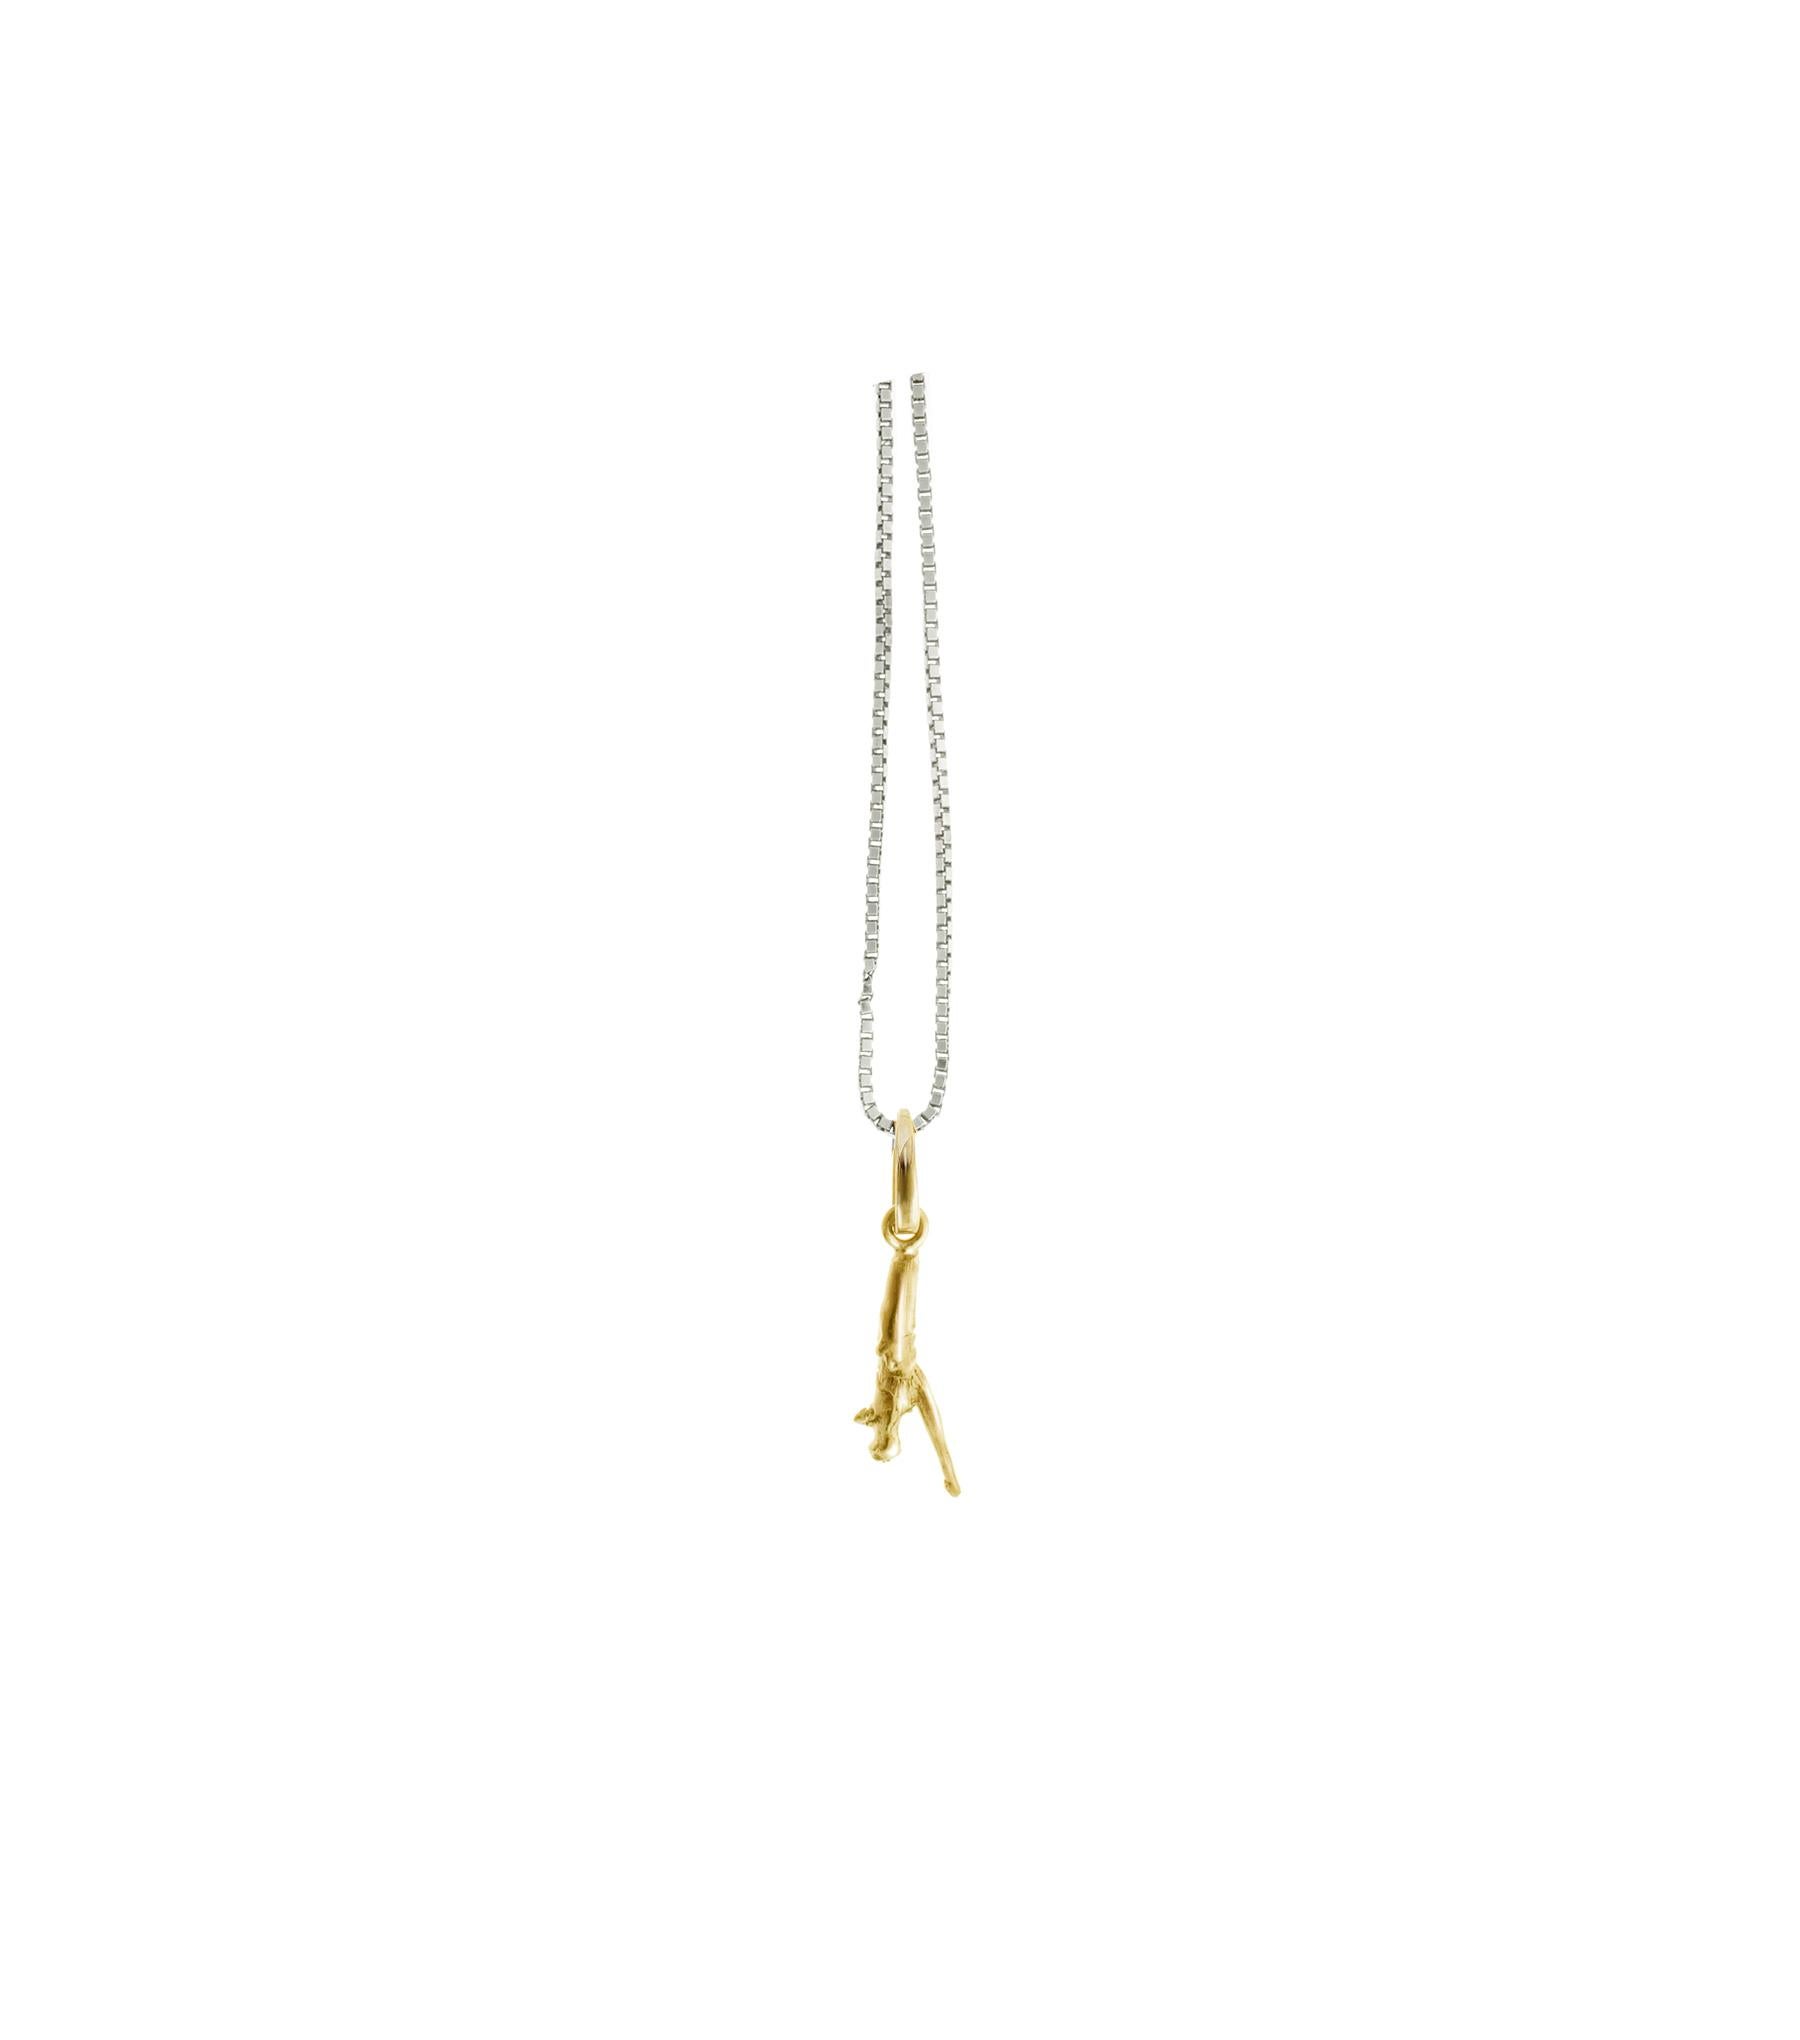 This delicate Tea Twig Chainka pendant is a unique piece of jewelry designed by artist Polya Medvedeva, and it is the first piece in her 